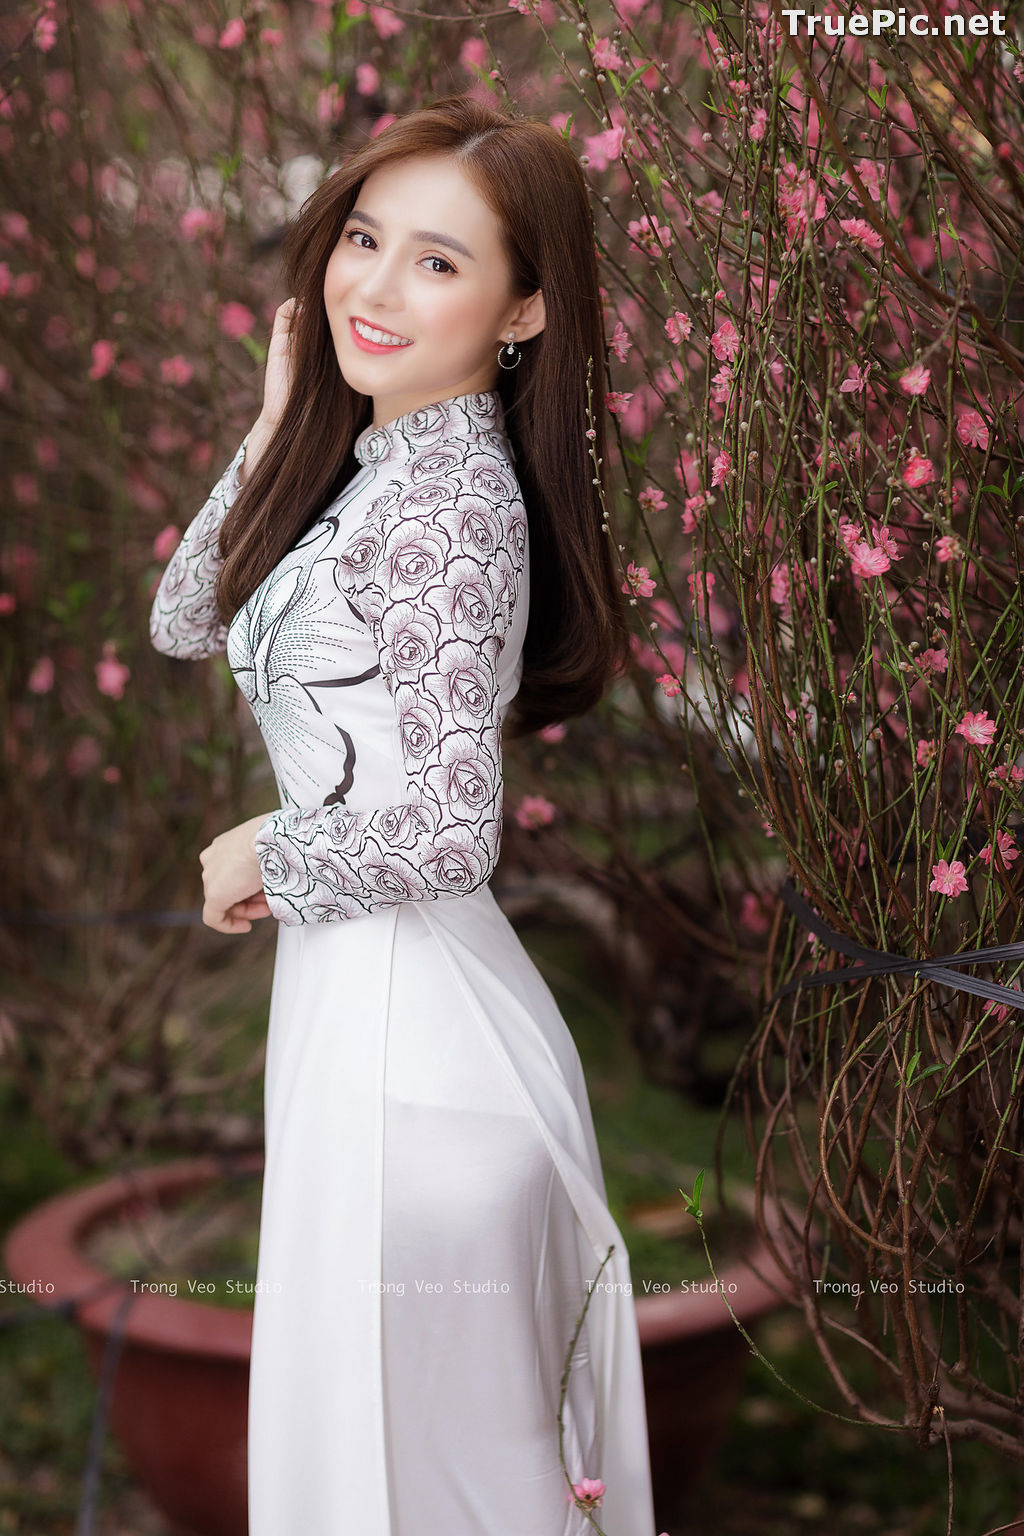 Image The Beauty of Vietnamese Girls with Traditional Dress (Ao Dai) #4 - TruePic.net - Picture-66